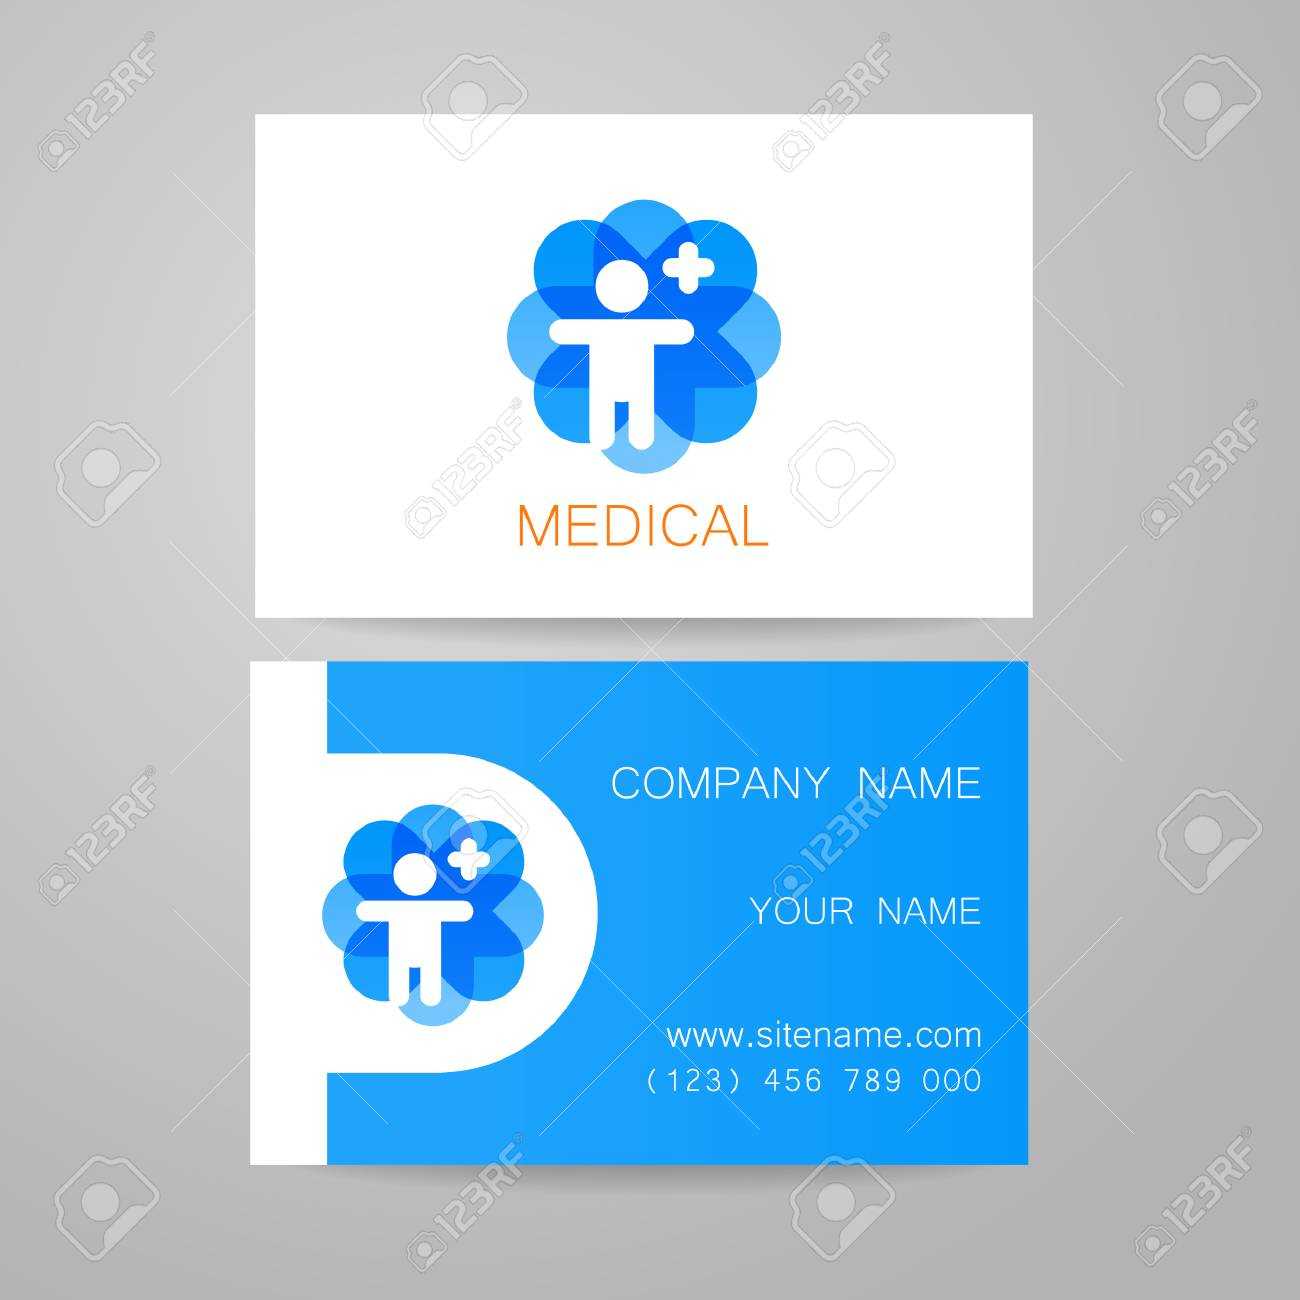 Template Of Medical Business Cards. For Medical Business Cards Templates Free